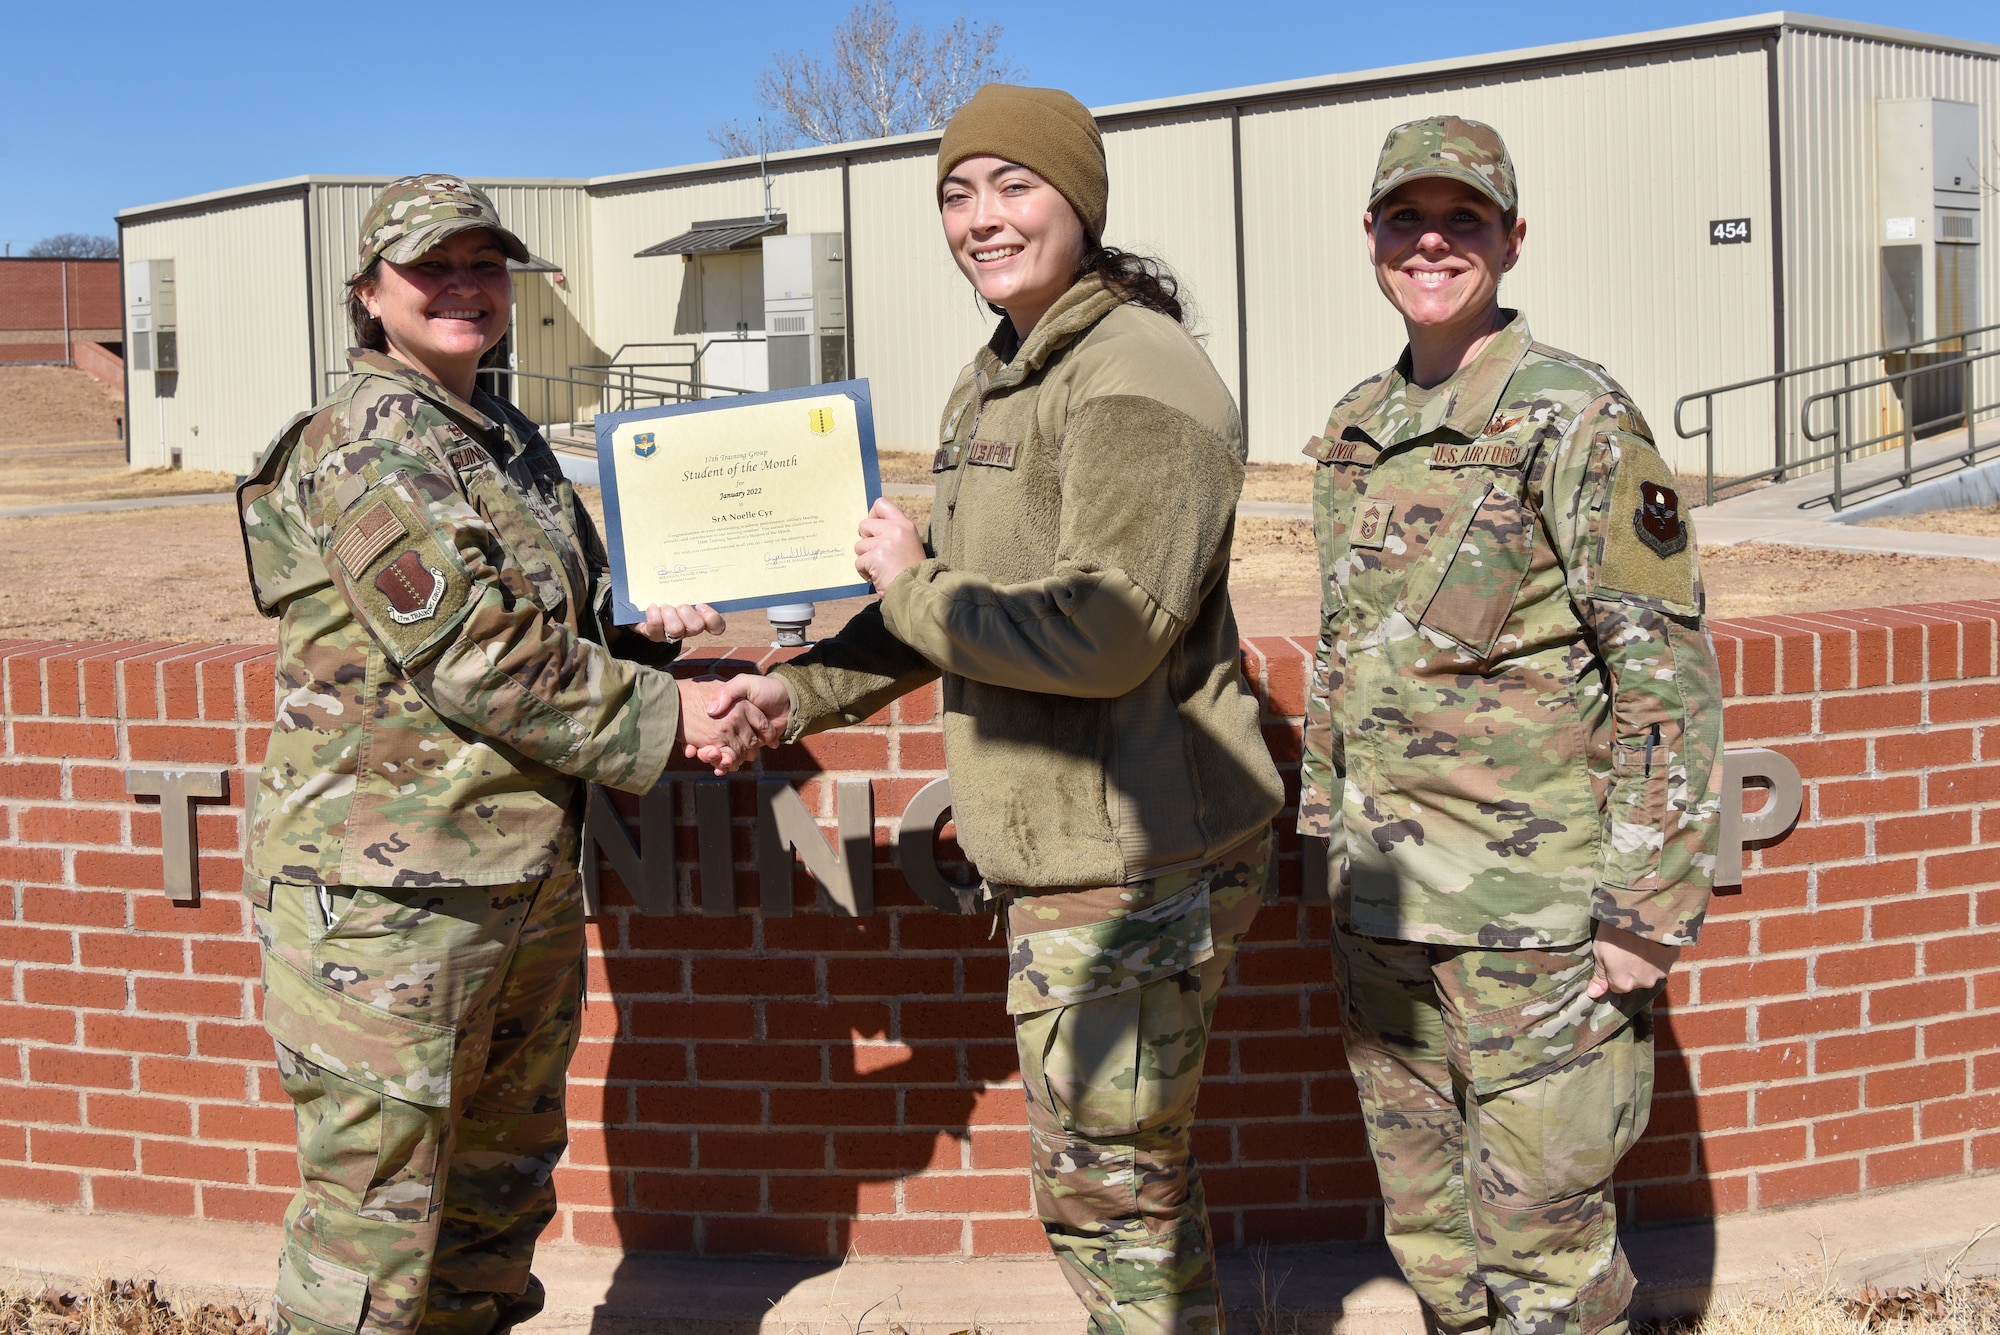 U.S. Air Force Col. Angelina Maguinness, 17th Training Group commander, and Chief Master Sgt. Breana Oliver, 17th TRG superintendent, presents Senior Airman Noelle Cyr, 316th Training Squadron student, a 17th TRG Student of the Month award for January 2022, outside of Brandenburg Hall, Goodfellow Air Force Base, Texas, Feb. 18, 2022. The 316th TRS is responsible for training, developing, and inspiring intelligence, surveillance and reconnaissance cryptologic leaders. (U.S. Air Force photo by Staff Sgt. Jermaine Ayers)